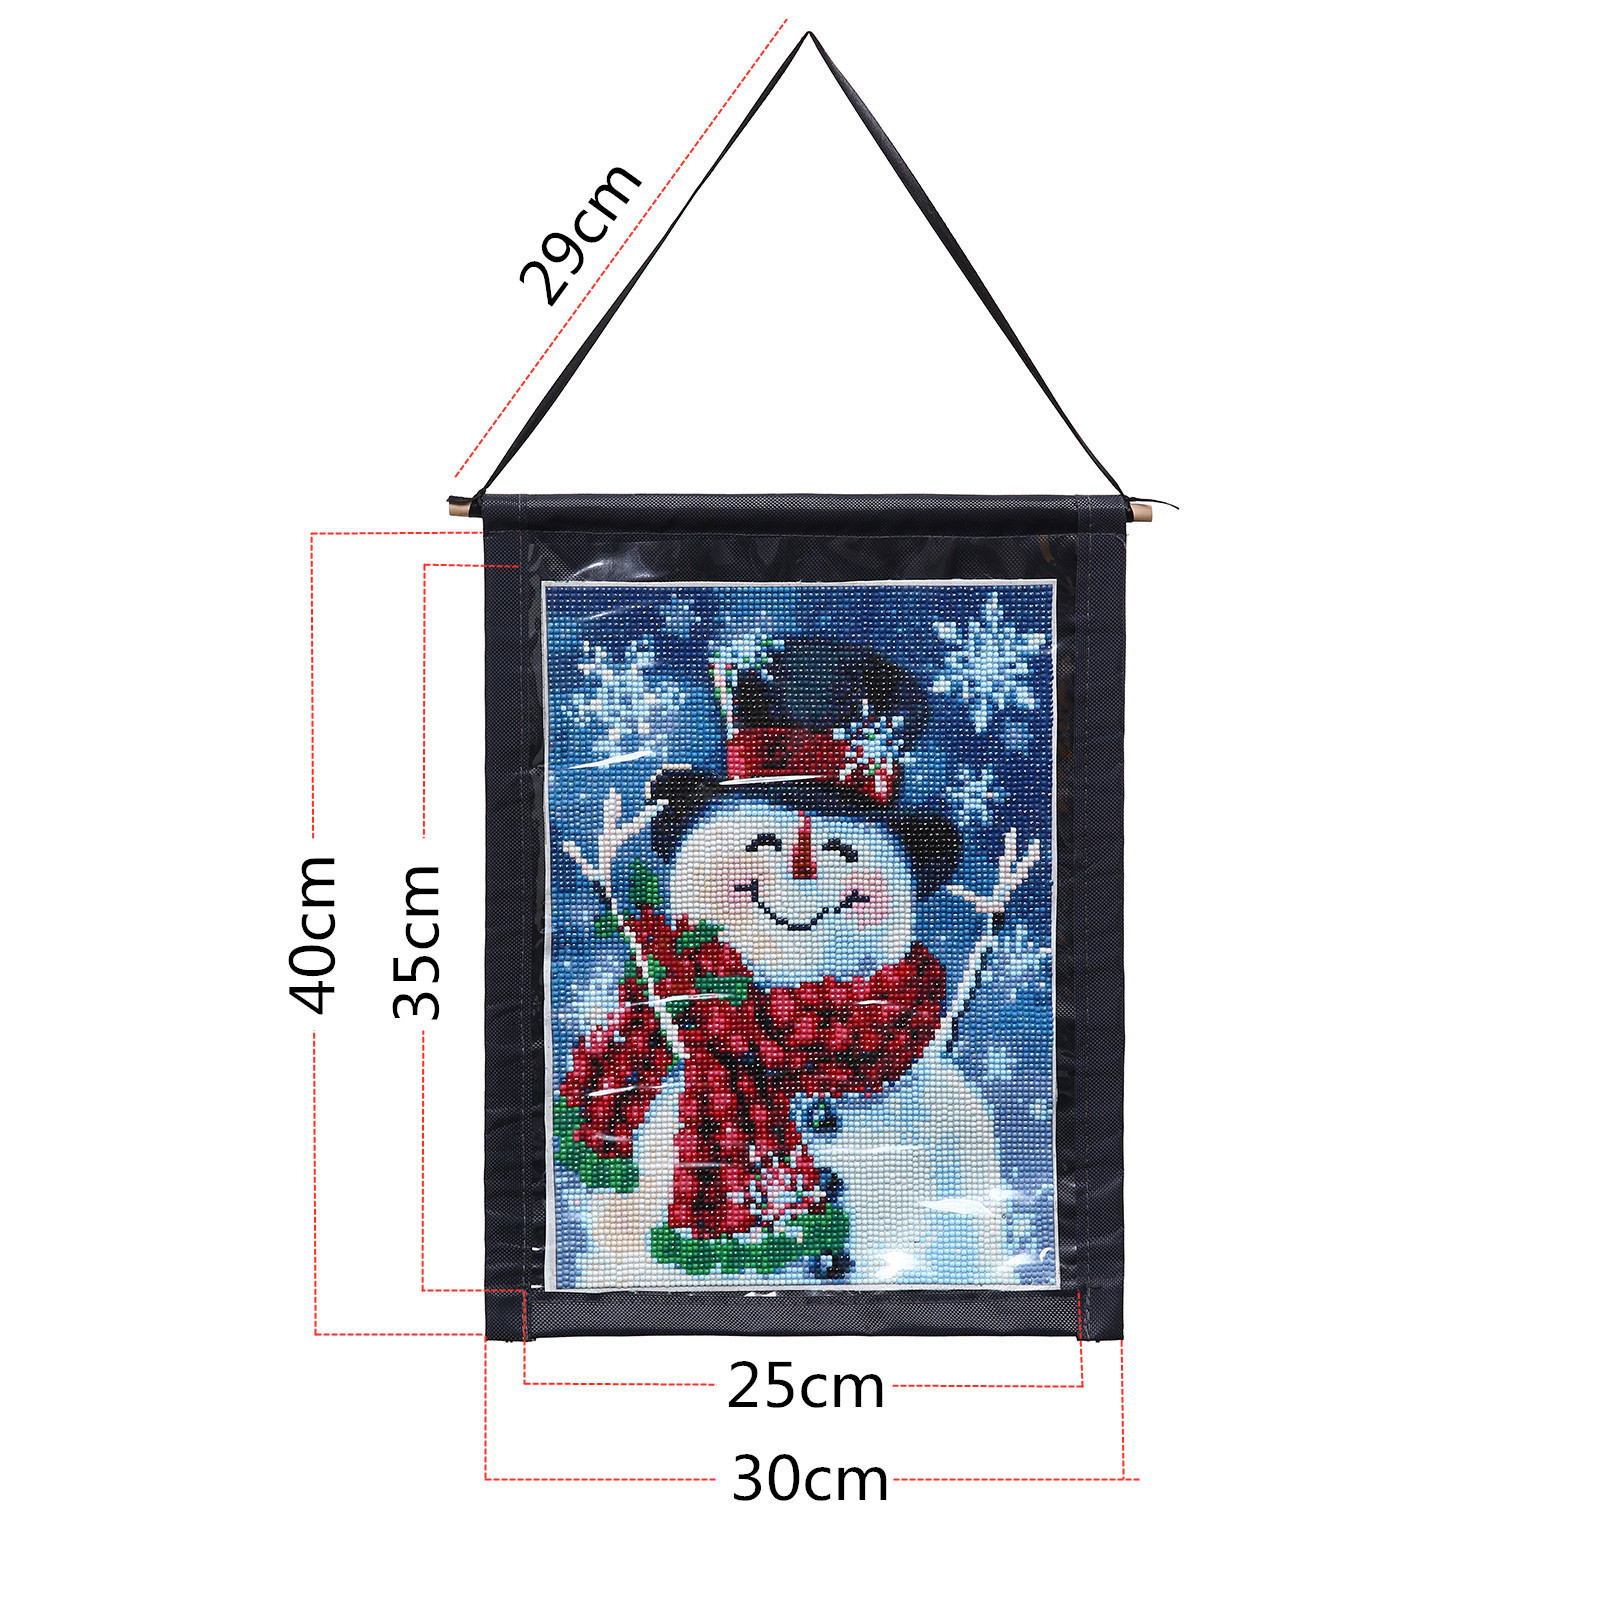 11.815.7 Inches Self-adhesive Magnetic Picture Frame for Diamond Painting  Display and Protection, Home Wall Office Decor 